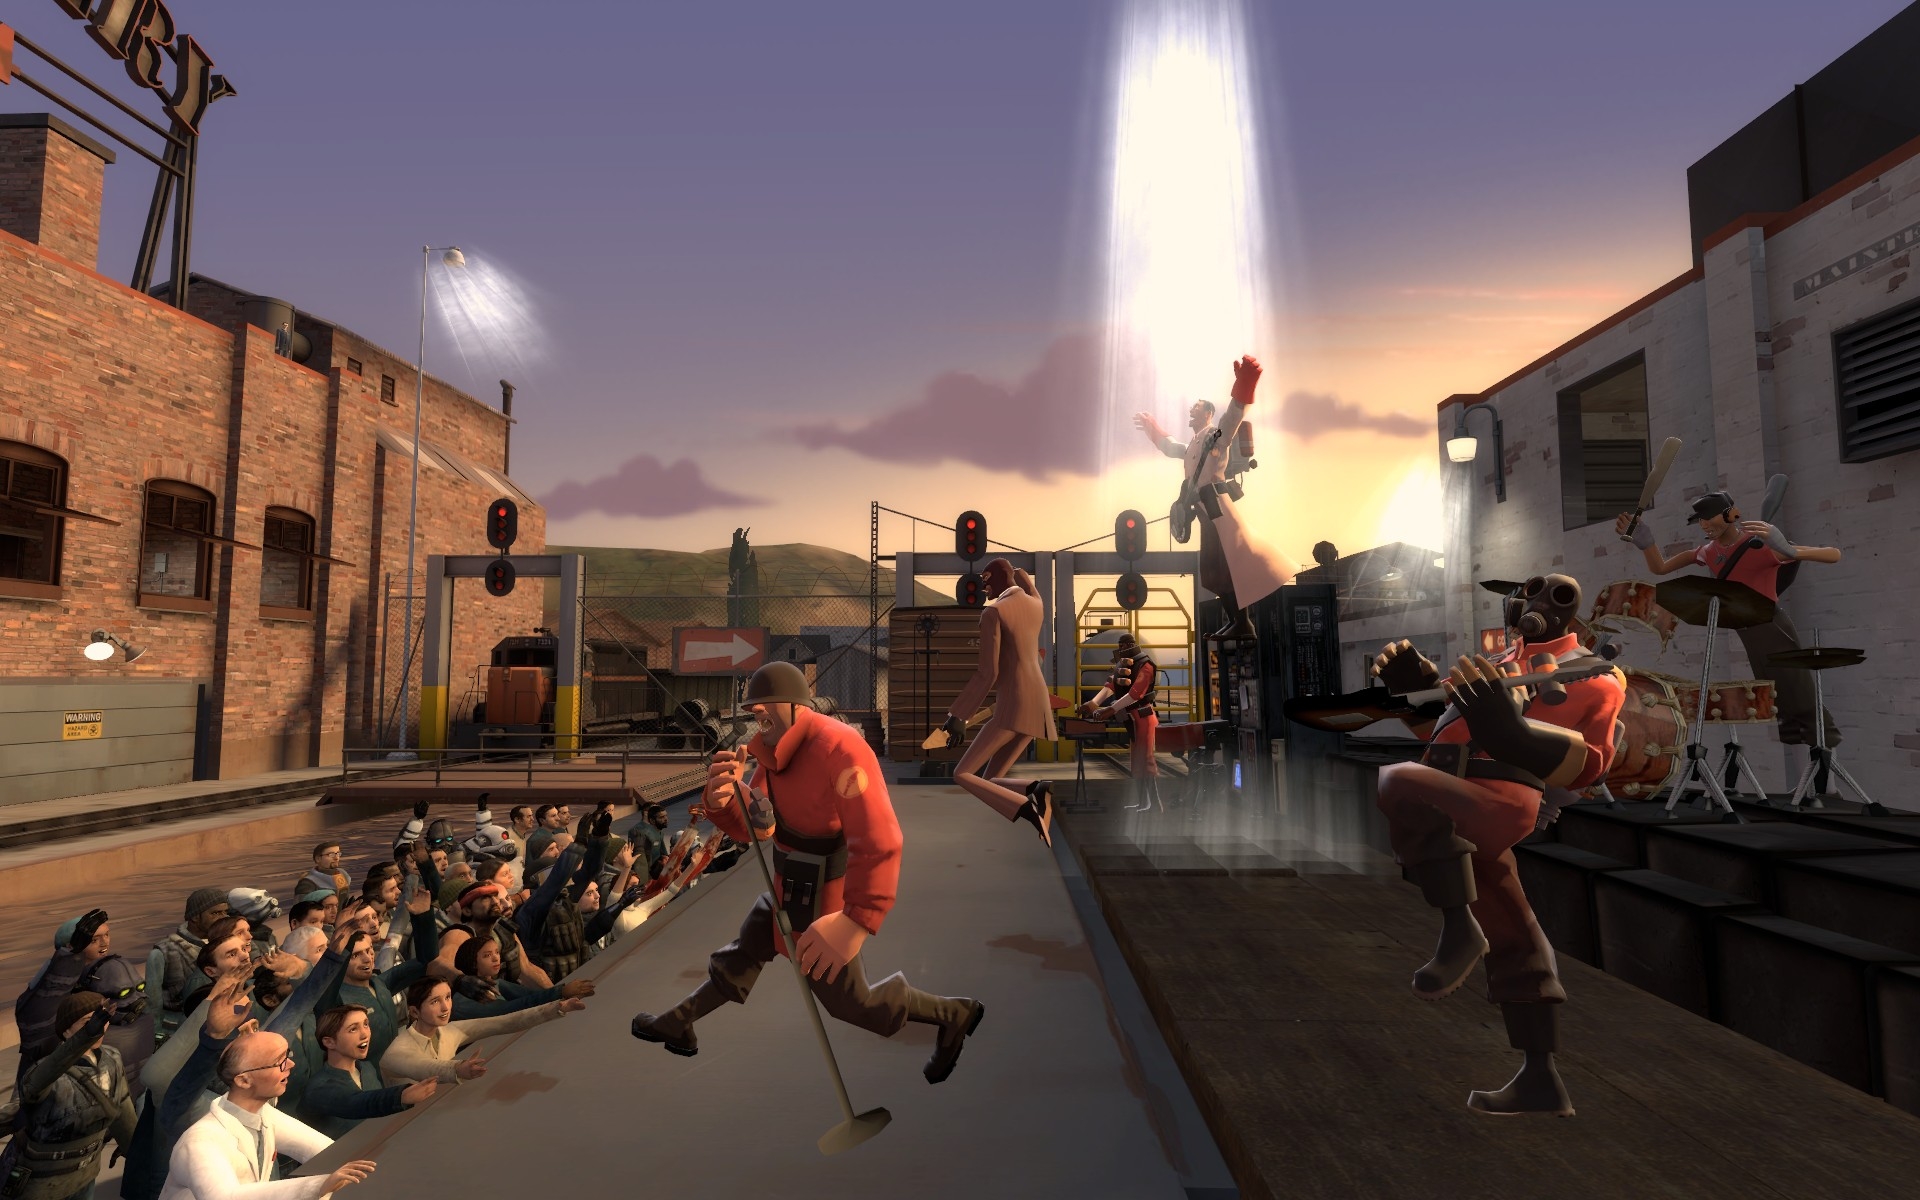 Video Game Team Fortress 2 HD Wallpaper | Background Image